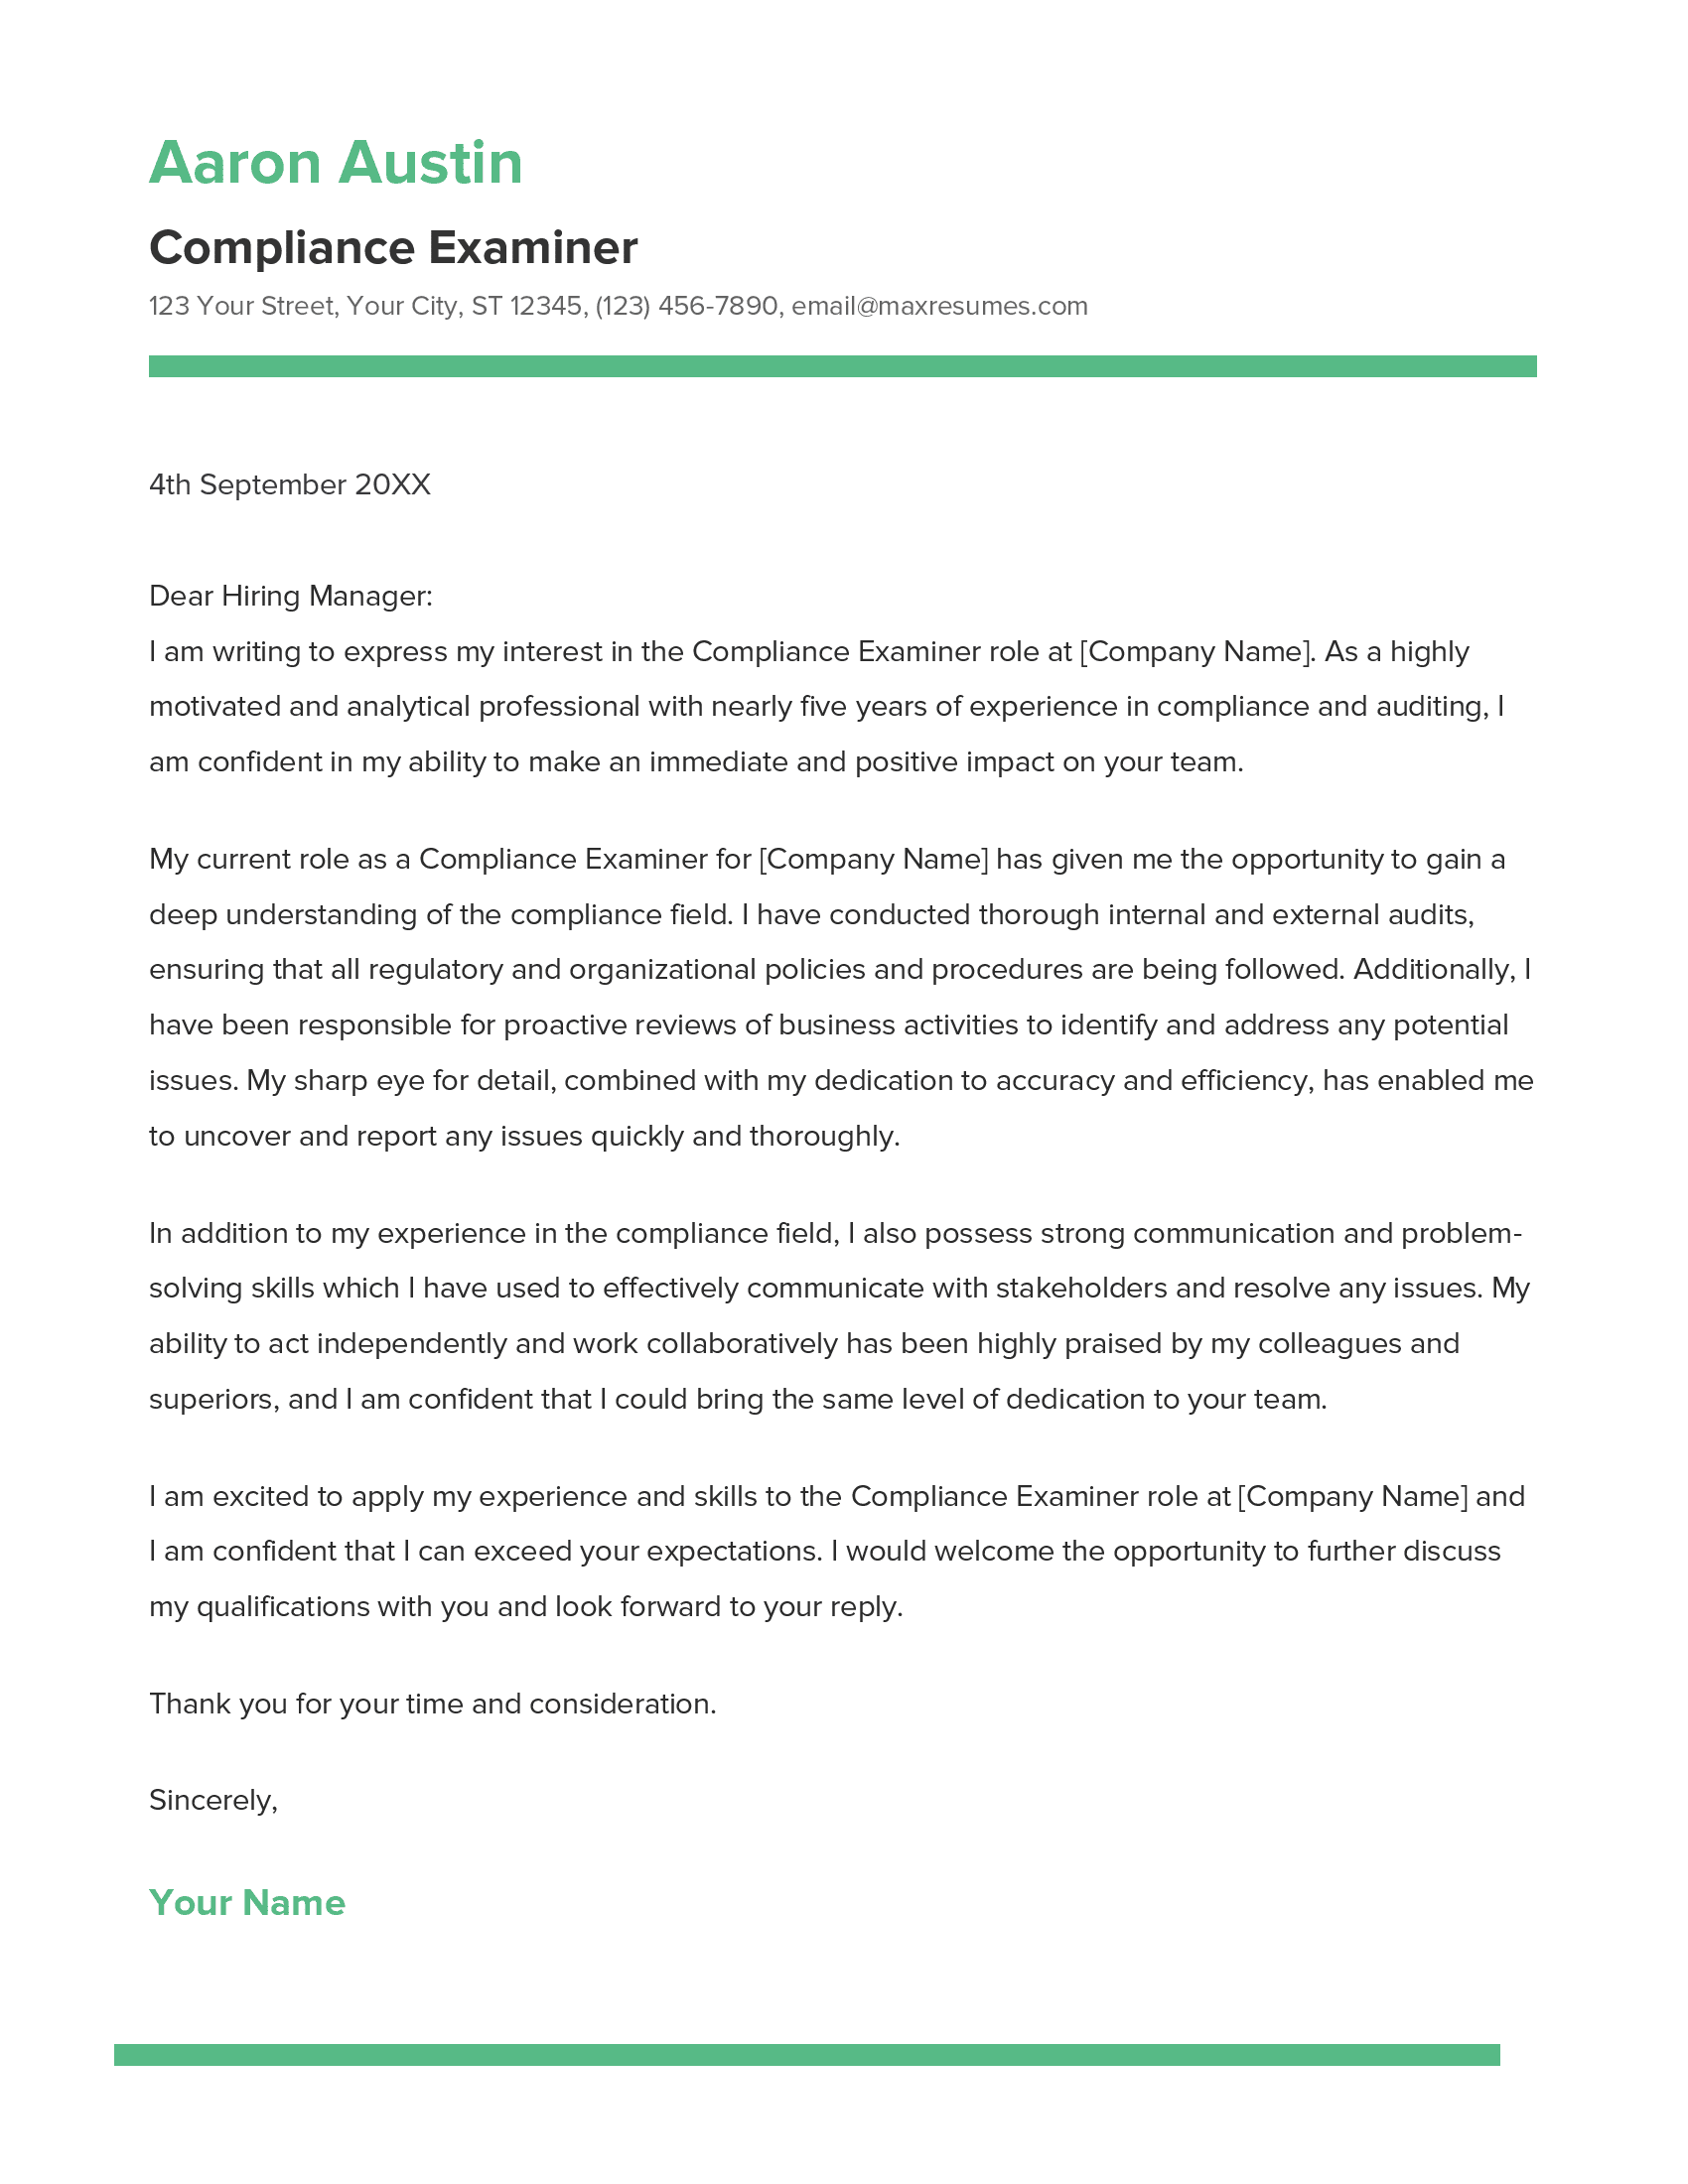 Compliance Examiner Cover Letter Example